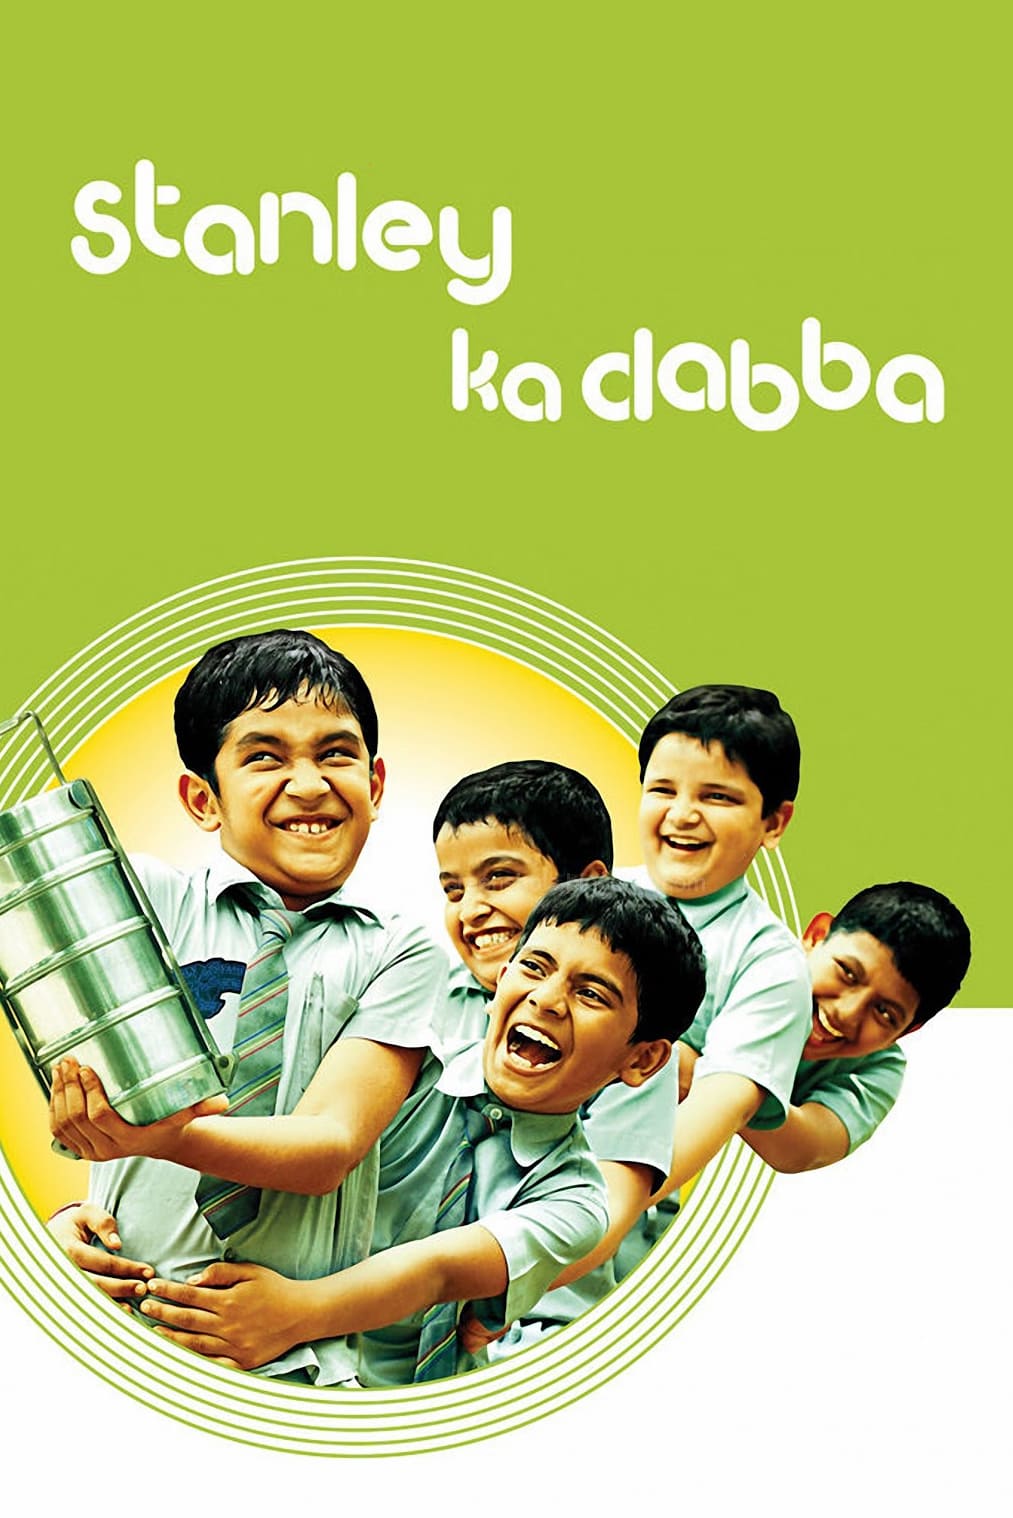 Poster for the movie "Stanley Ka Dabba"